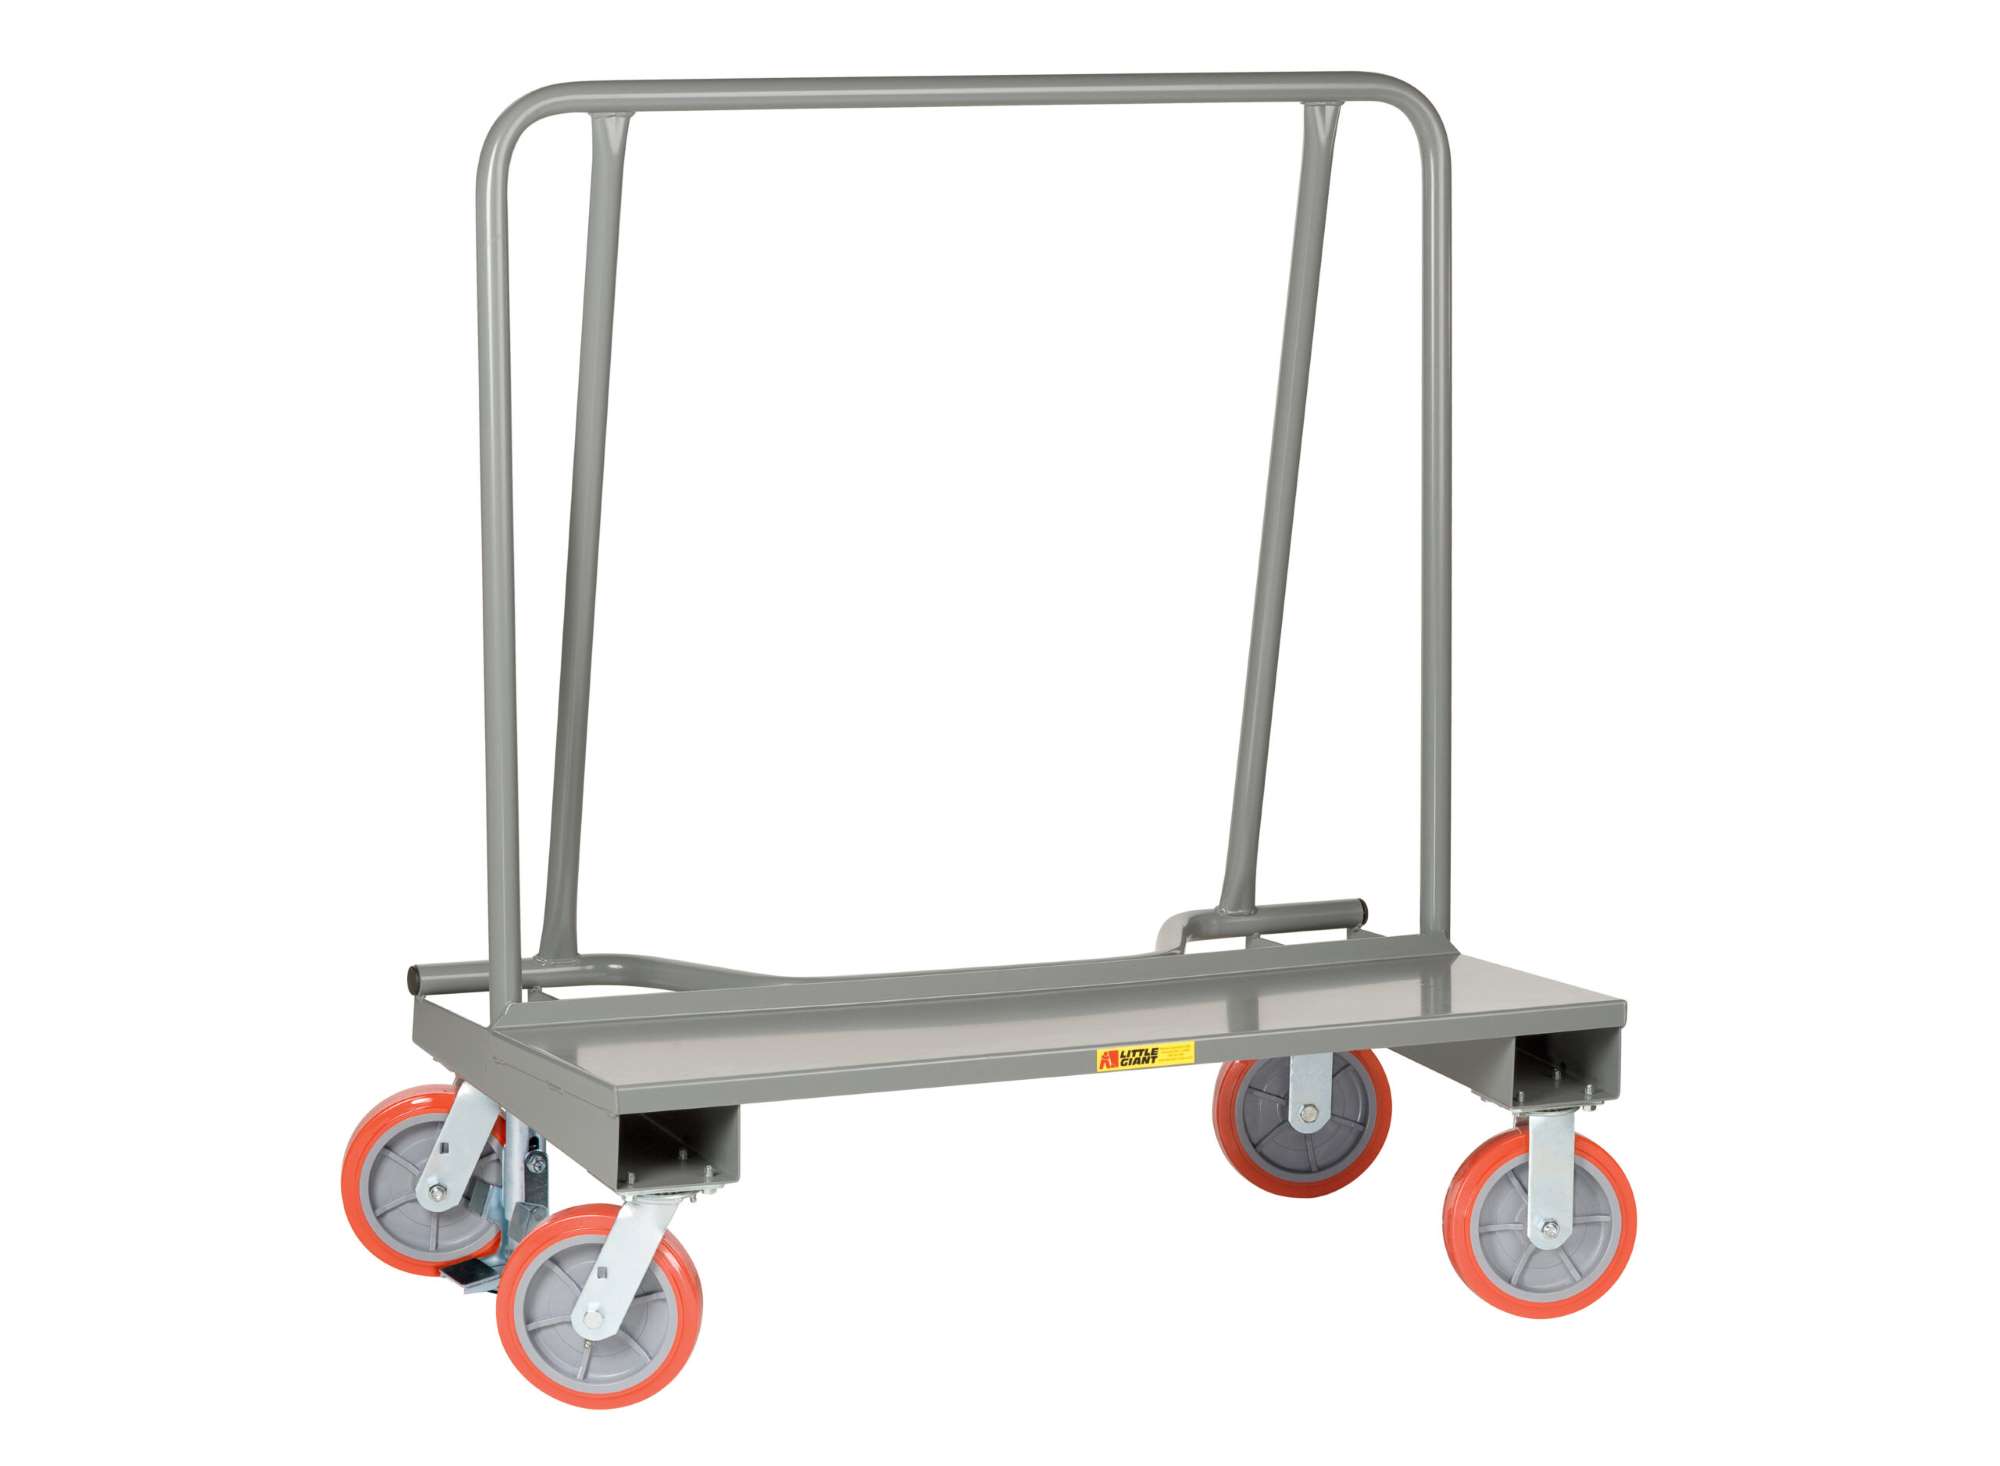 Little Giant, Drywall cart, 2000 lbs capacity, 12ga deck, 14" x 44" deck, Available with 4 swivel casters or 2 rigid and 2 swivel casters with floor lock, Overall 24"W x 22"L x 51"H